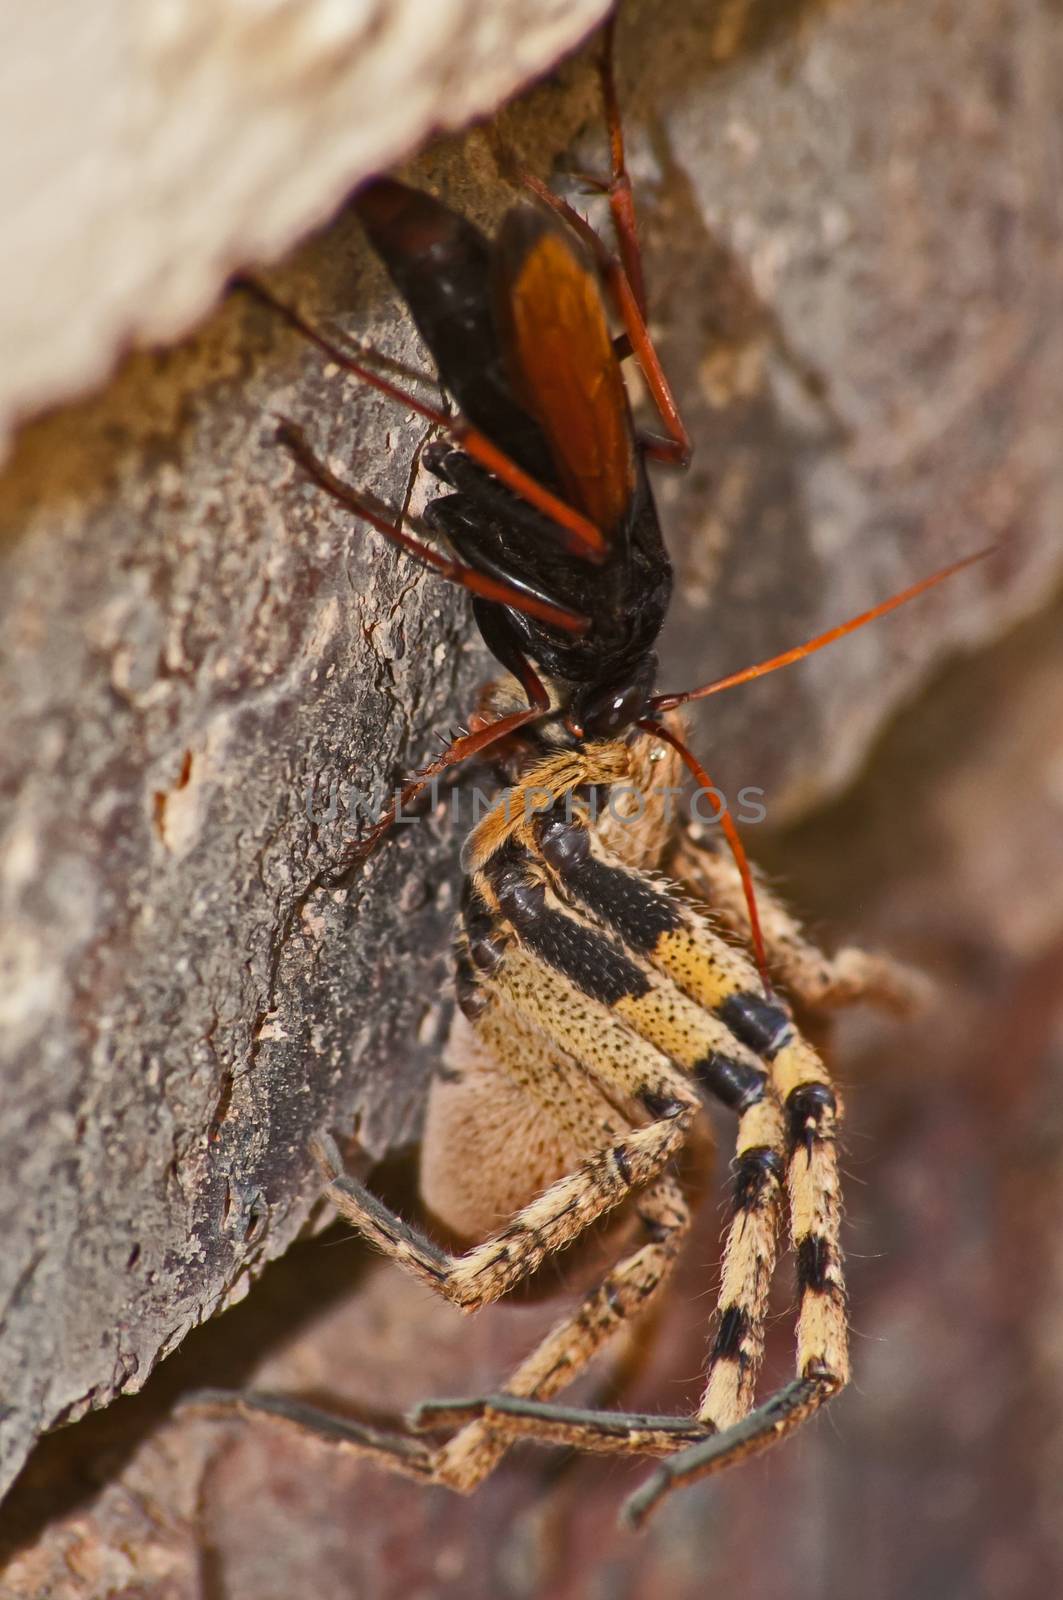 The adult wasps actually eats nectar, the female stings and paralyses the spider and then drags it to her burrow. There she lays a single egg on it. Because the spider is not dead, the meat stays fresh and the larvae eat the spider alive.